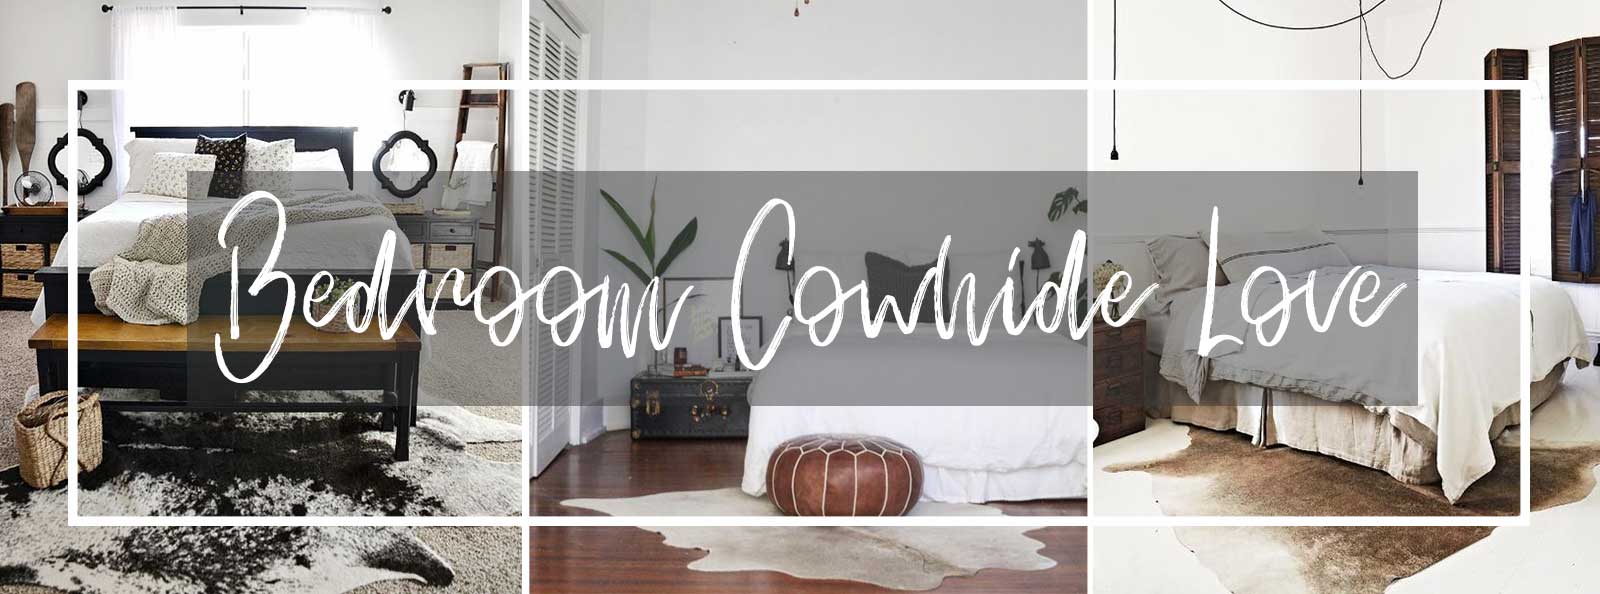 Bedrooms come to life with a natural cowhide area rug.